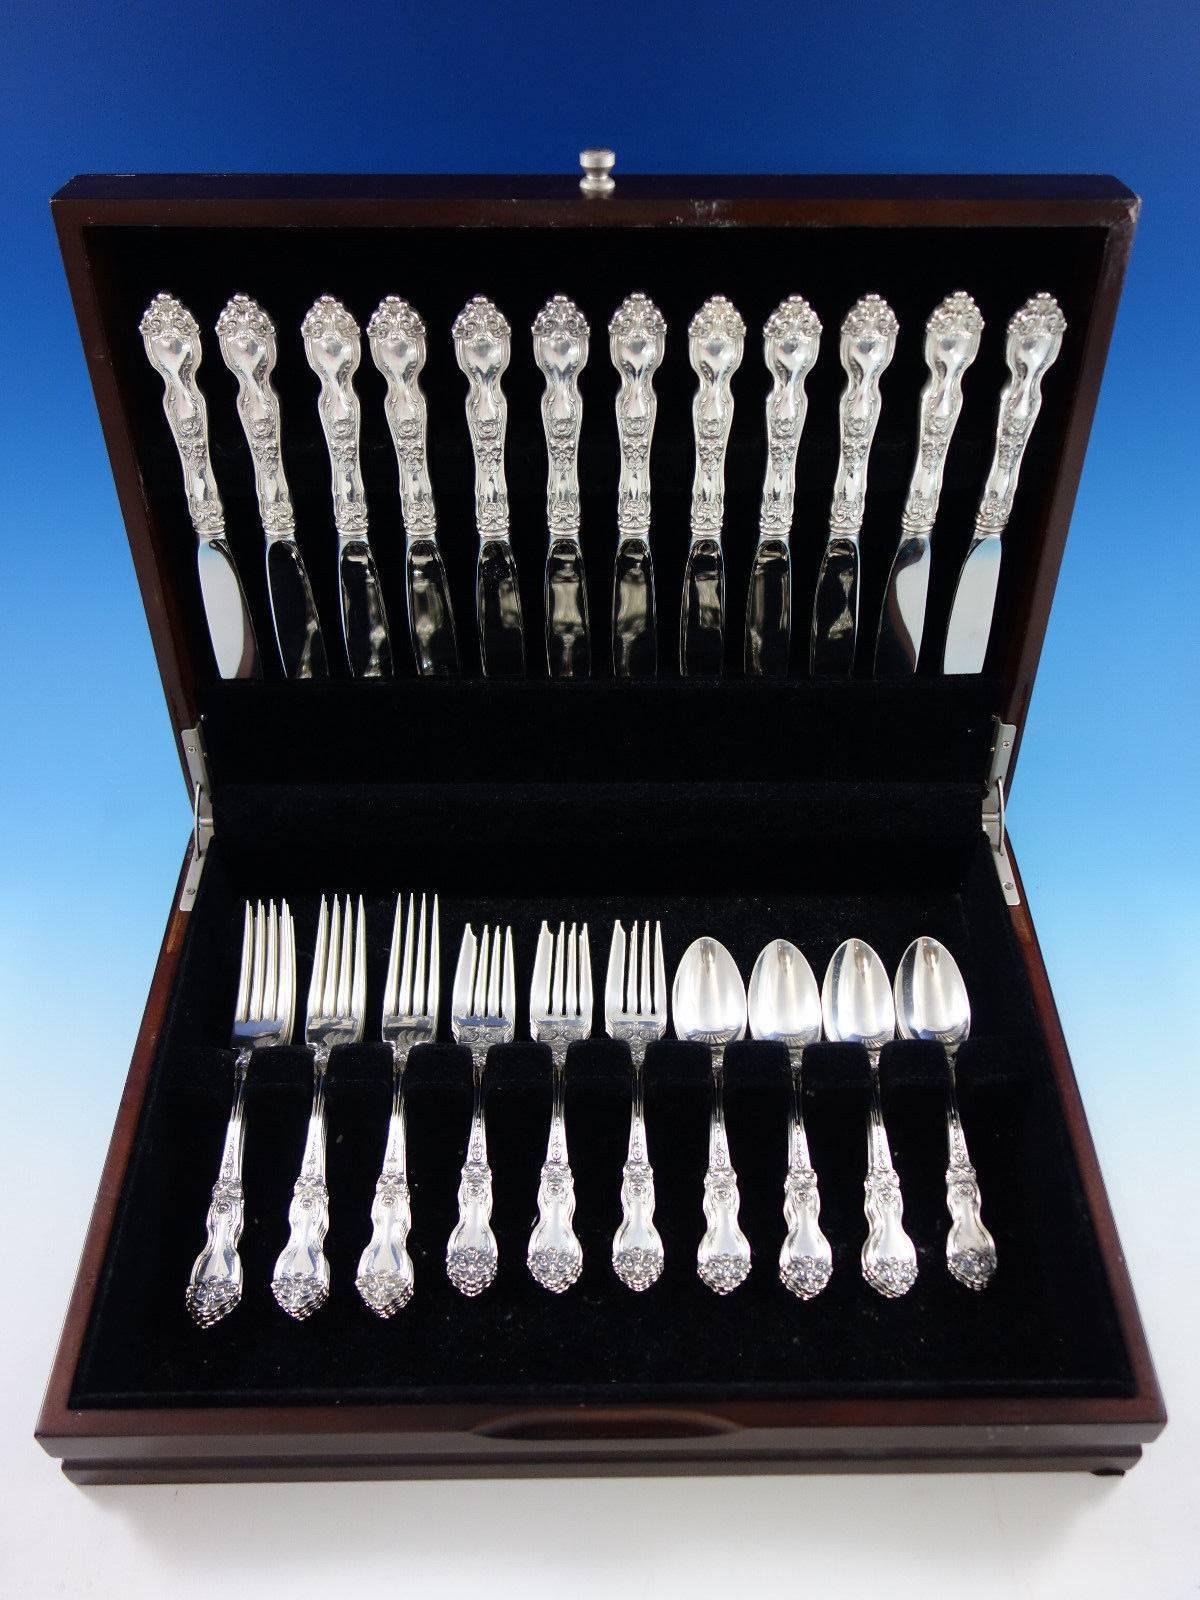 La Reine by Wallace sterling silver flatware set of 48 pieces. This set includes: 

12 knives, 9